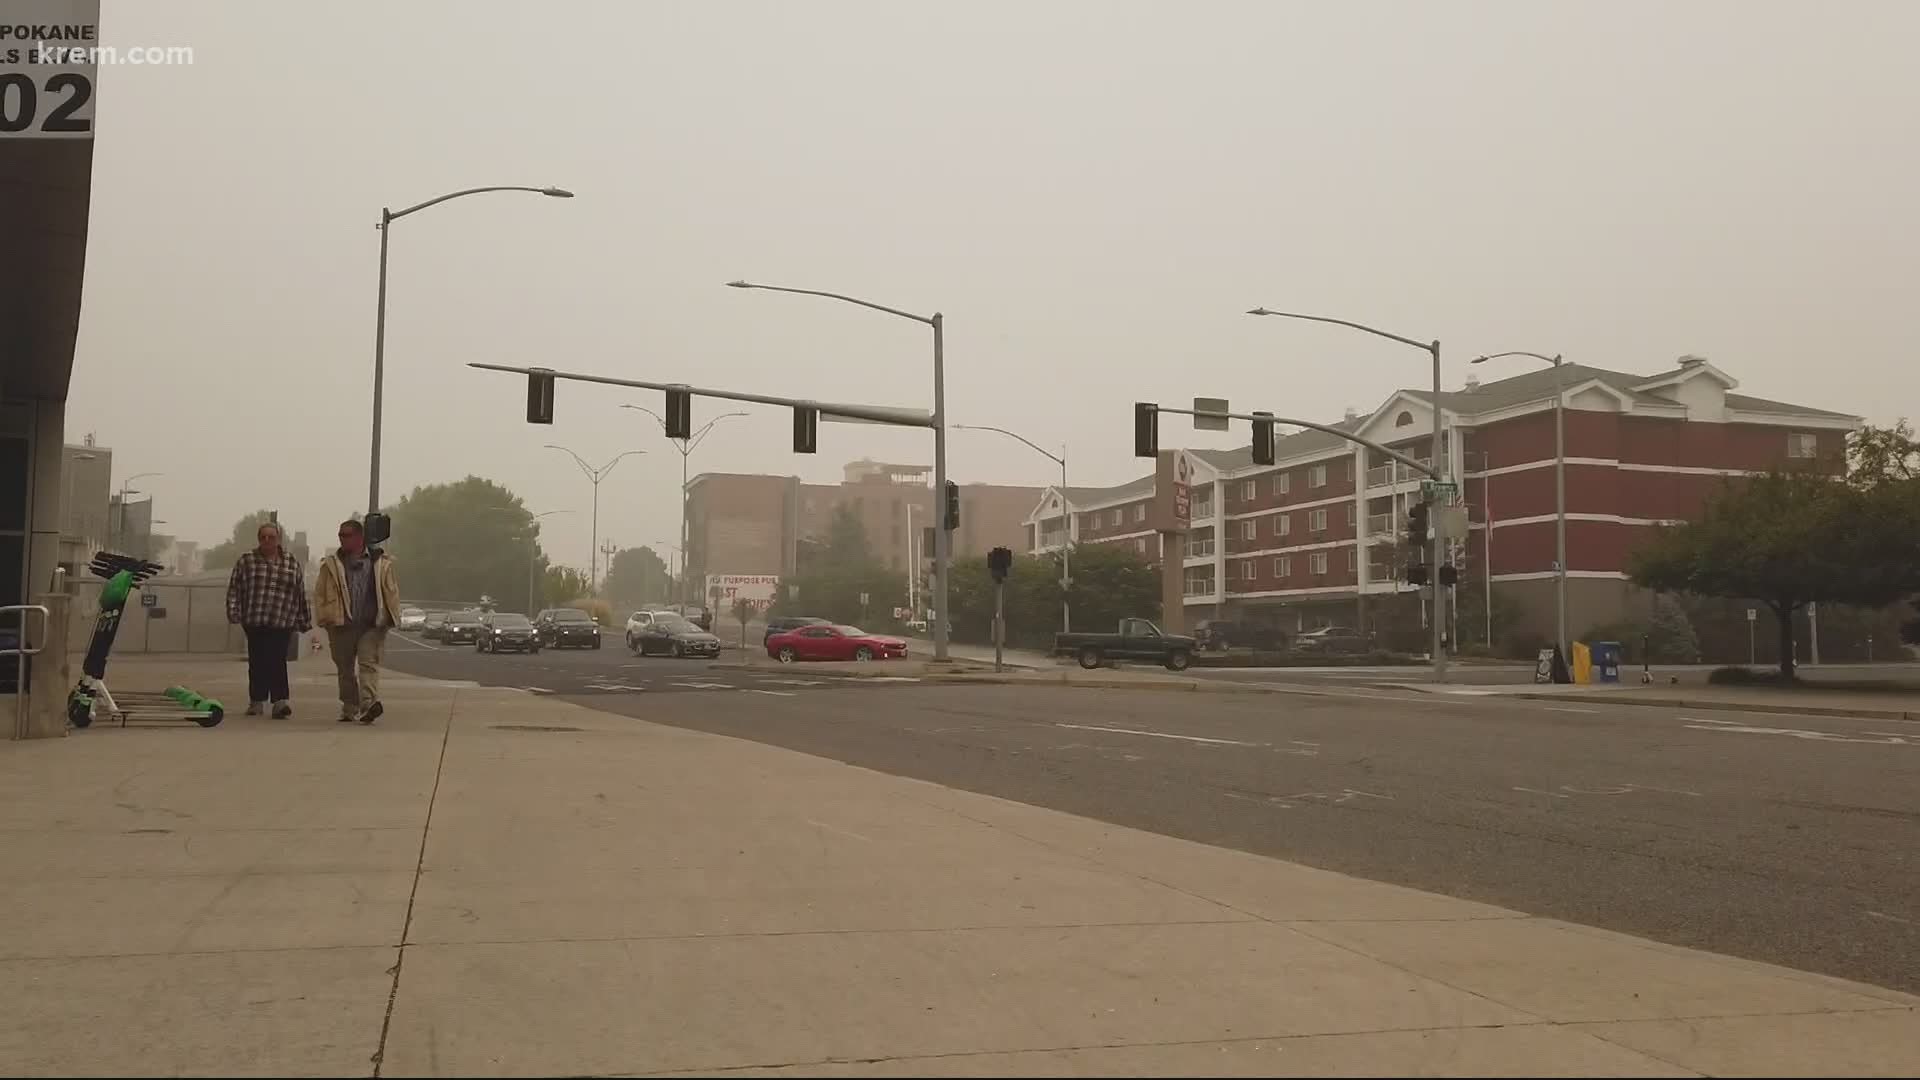 The center will run 24 hours a day while the air quality index remains above 250, which is in the Very Unhealthy range, according to a press release from the city.